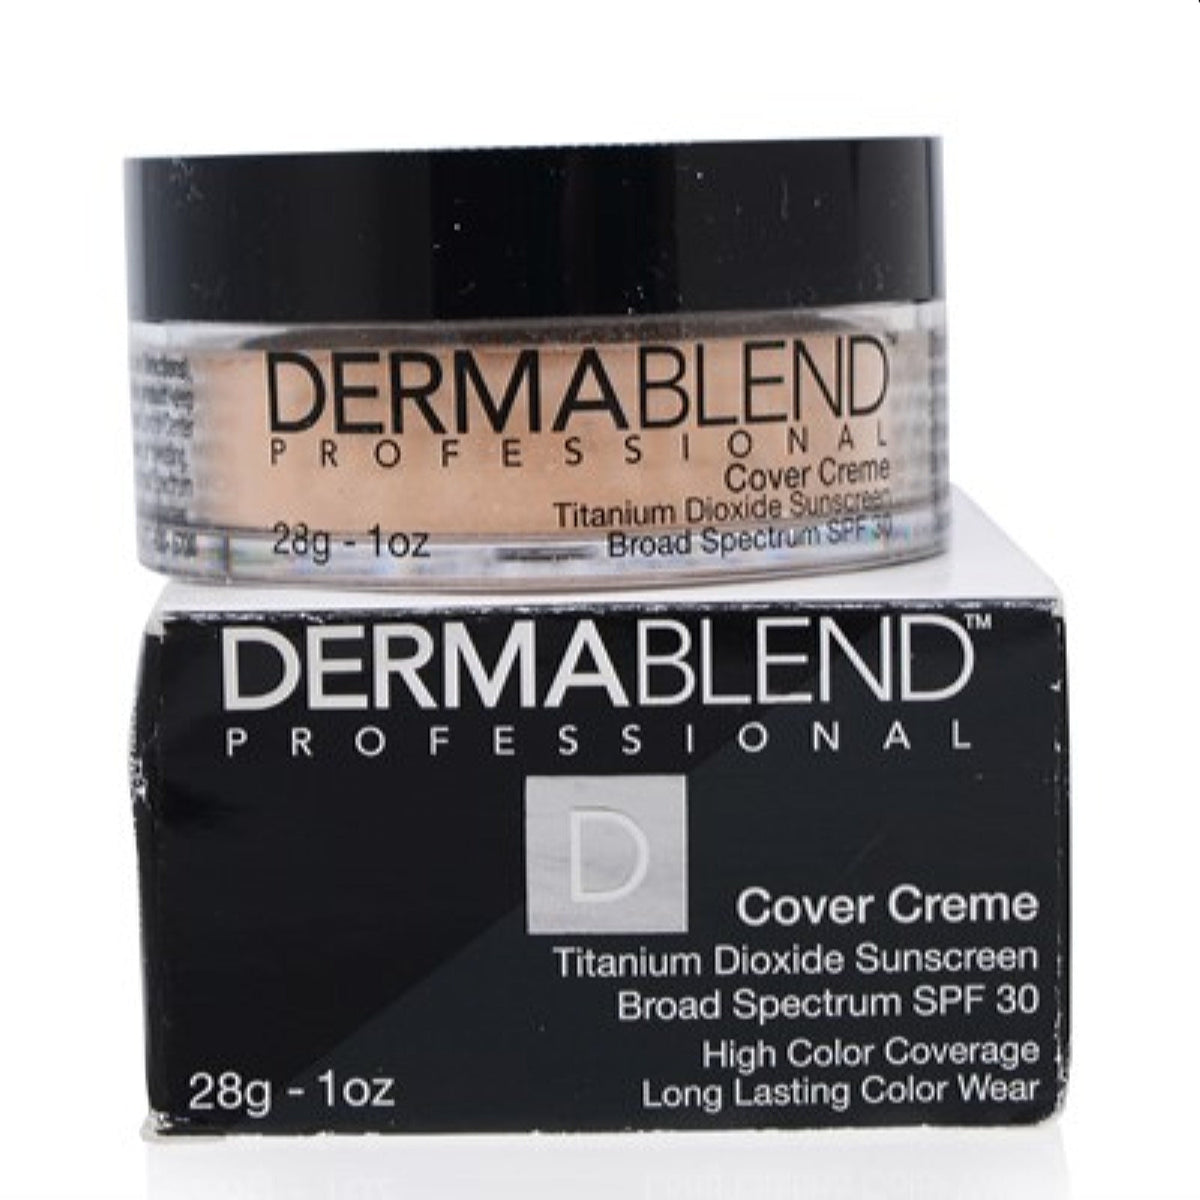 Dermablend Cover Creme Foundation Spf 30 (0 Pale Ivory) 1.0 Oz (28 Ml)   